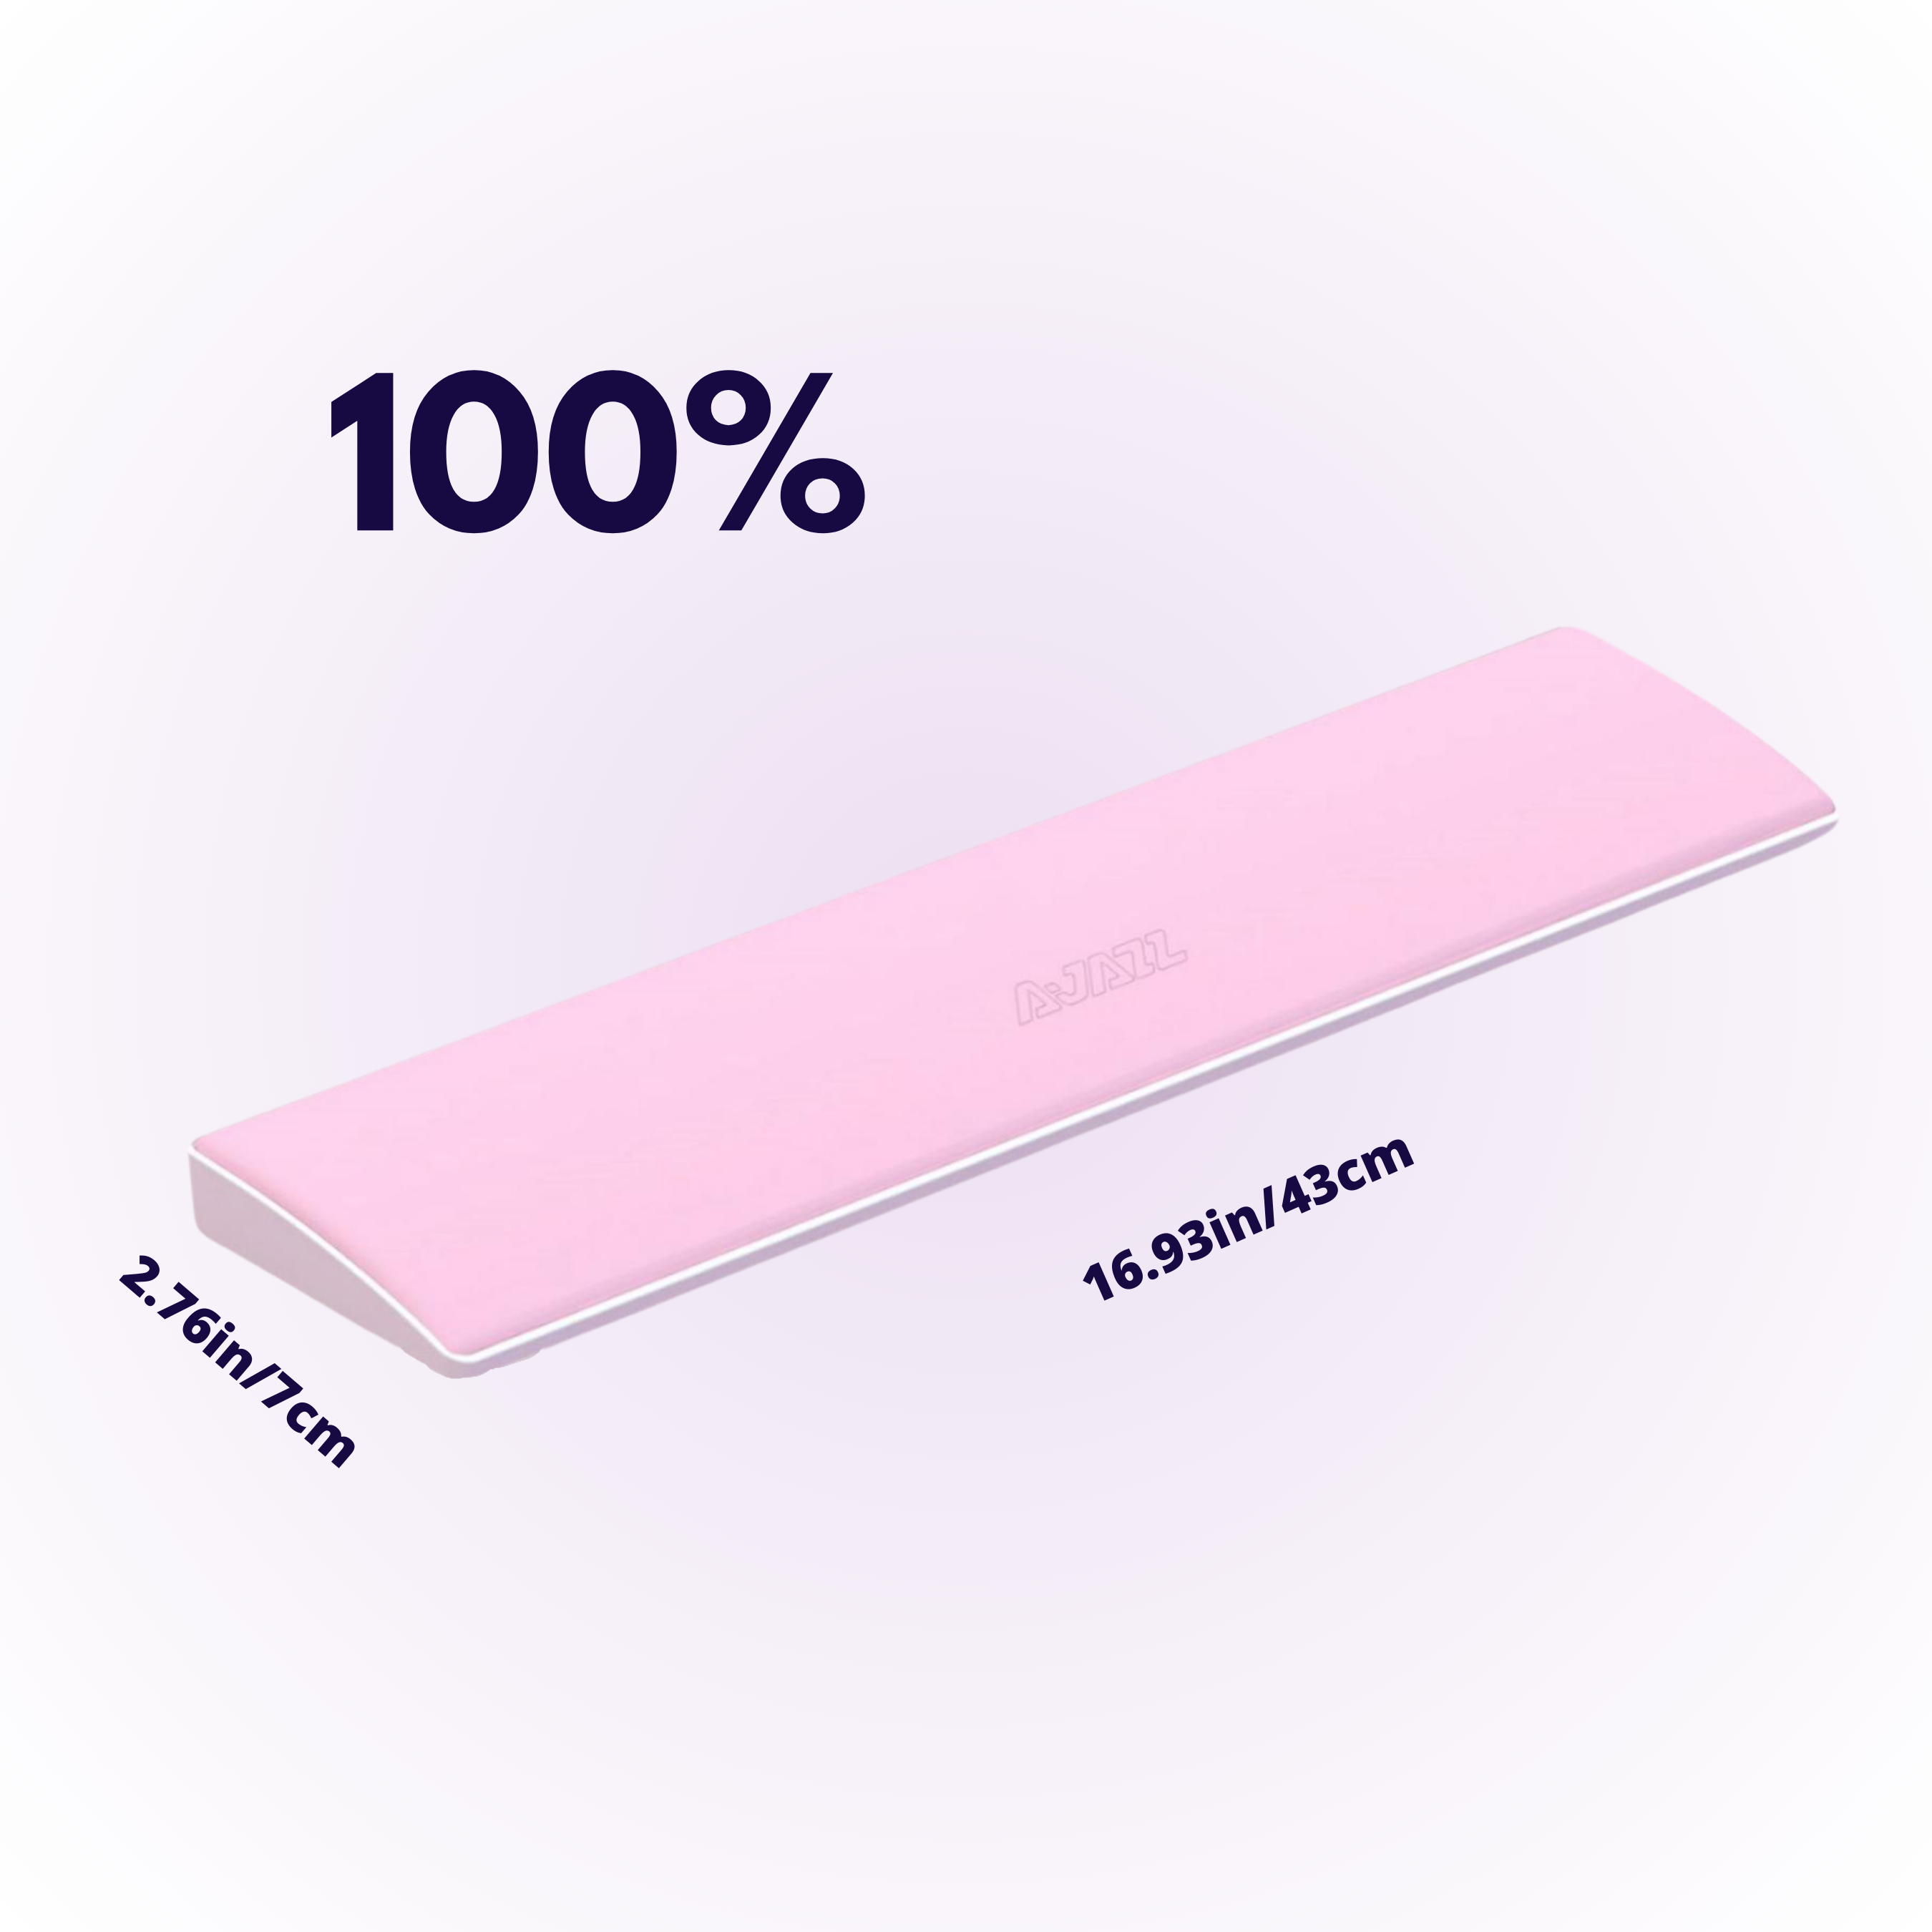 100% mechanical keyboard pink wrist rest with a white base view from an angle